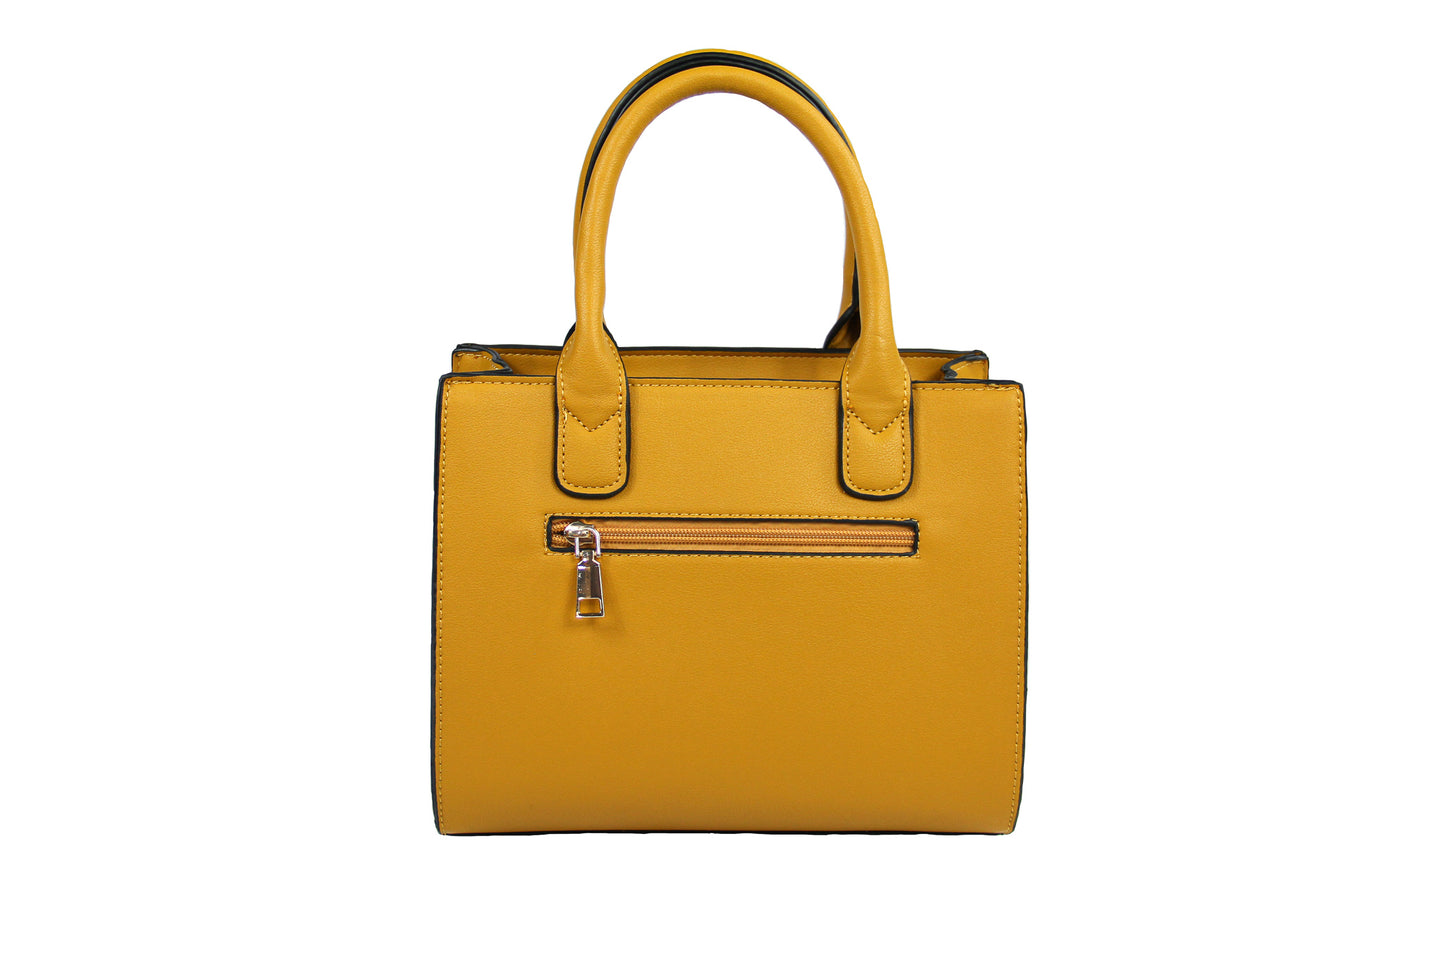 Shop for Mustard High Quality Satchel Handbag with Snake Print Detail. Stylish and Trendy. Includes Removable/Adjustable Straps. Top Handles. Perfect Standout Piece to Complete your Look. Many more styles at LAZO CHIC